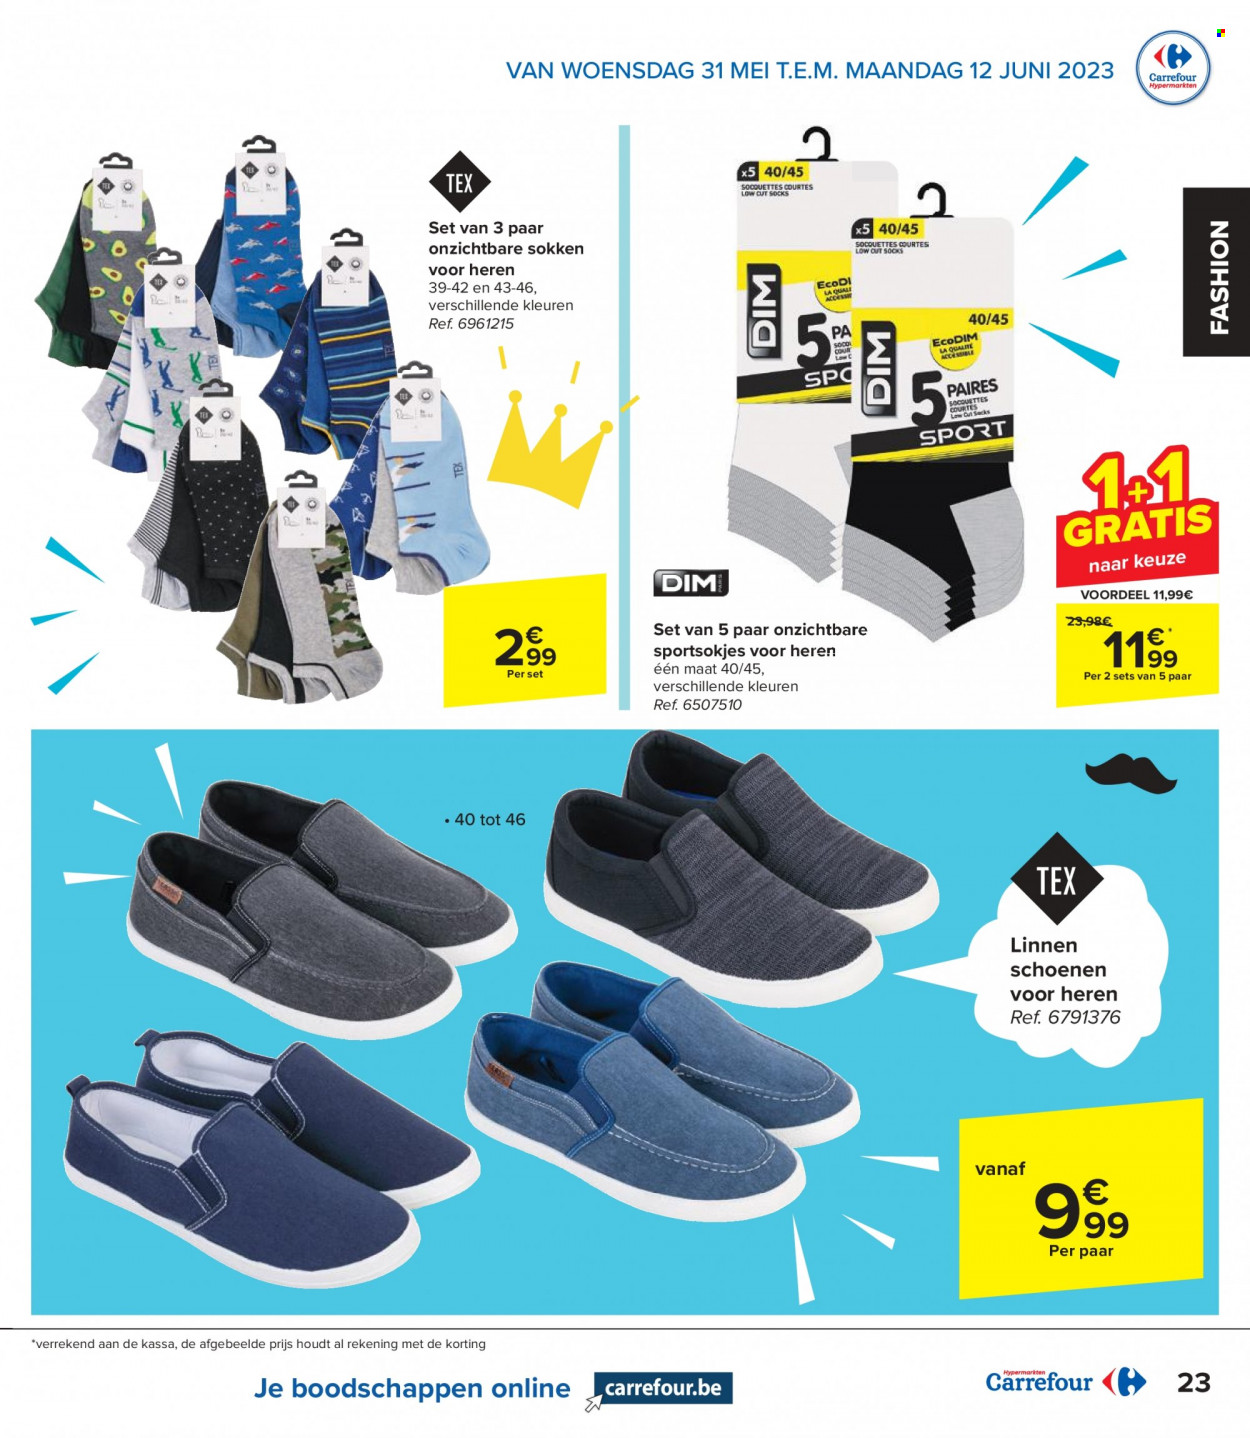 Catalogue Carrefour hypermarkt - 31.5.2023 - 12.6.2023. Page 23.